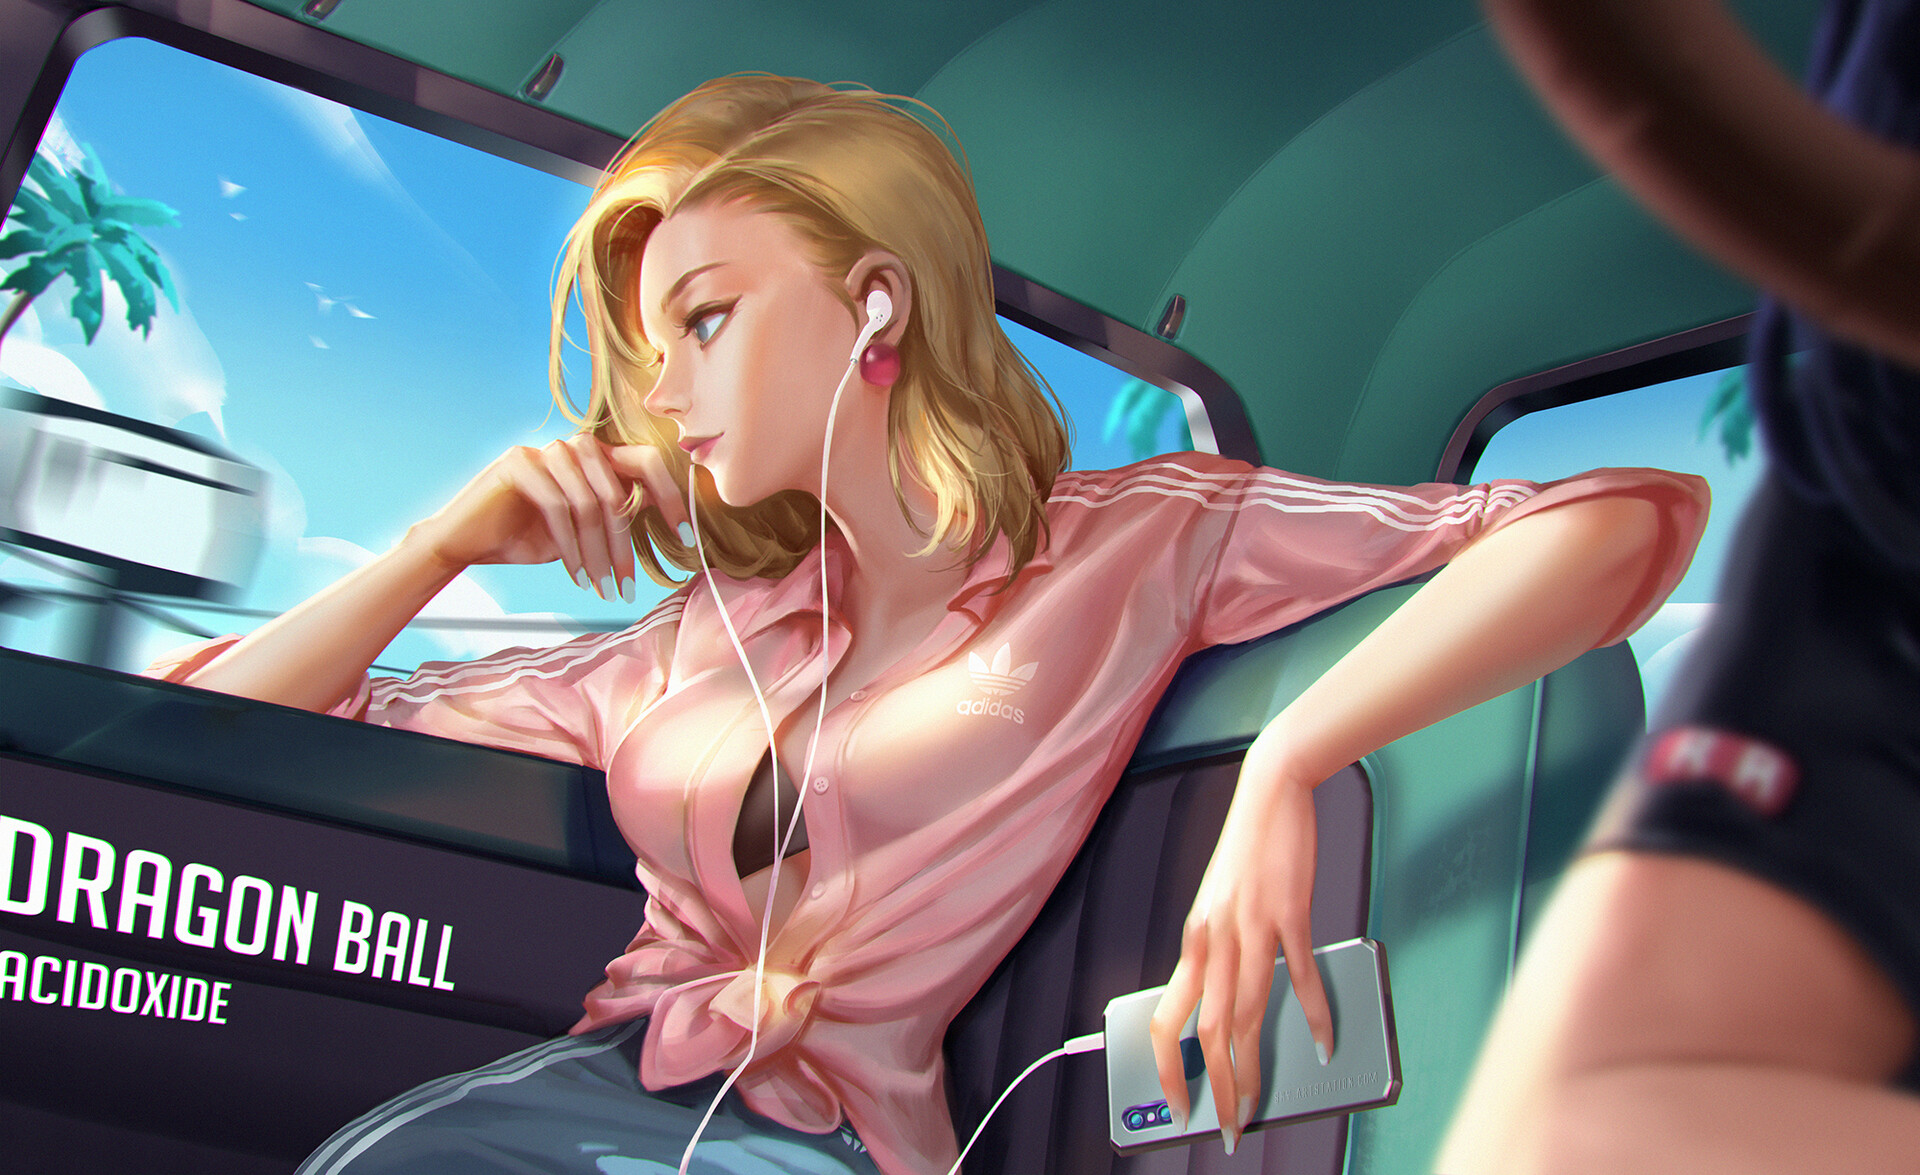 General 1920x1175 Dragon Ball blonde fan art Adidas Android 18 anime girls blue eyes smartphone low-angle profile earphones car